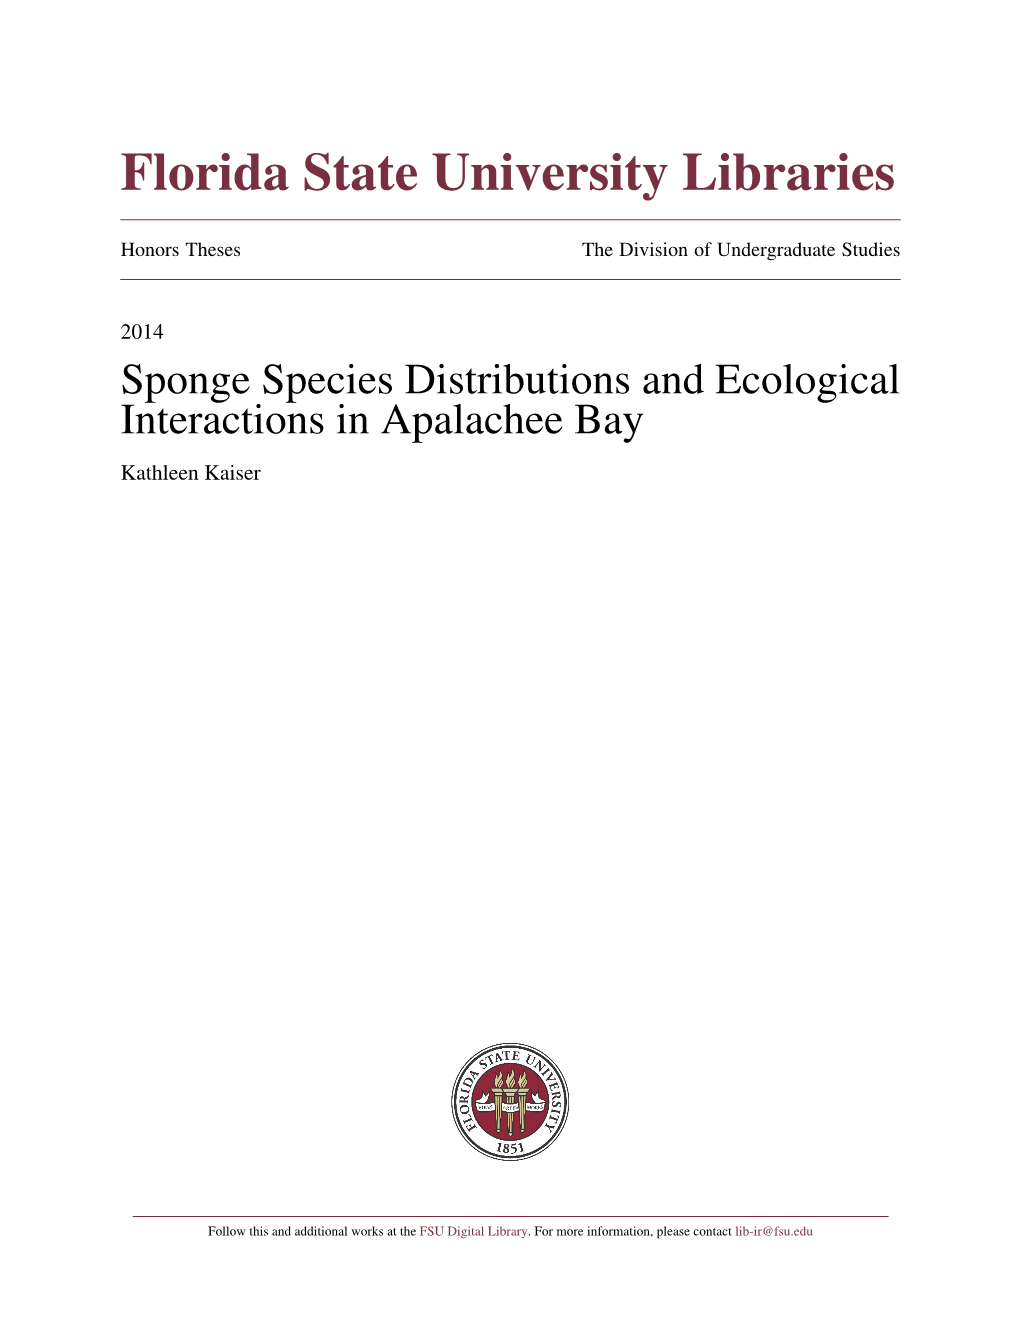 Sponge Species Distributions and Ecological Interactions in Apalachee Bay Kathleen Kaiser